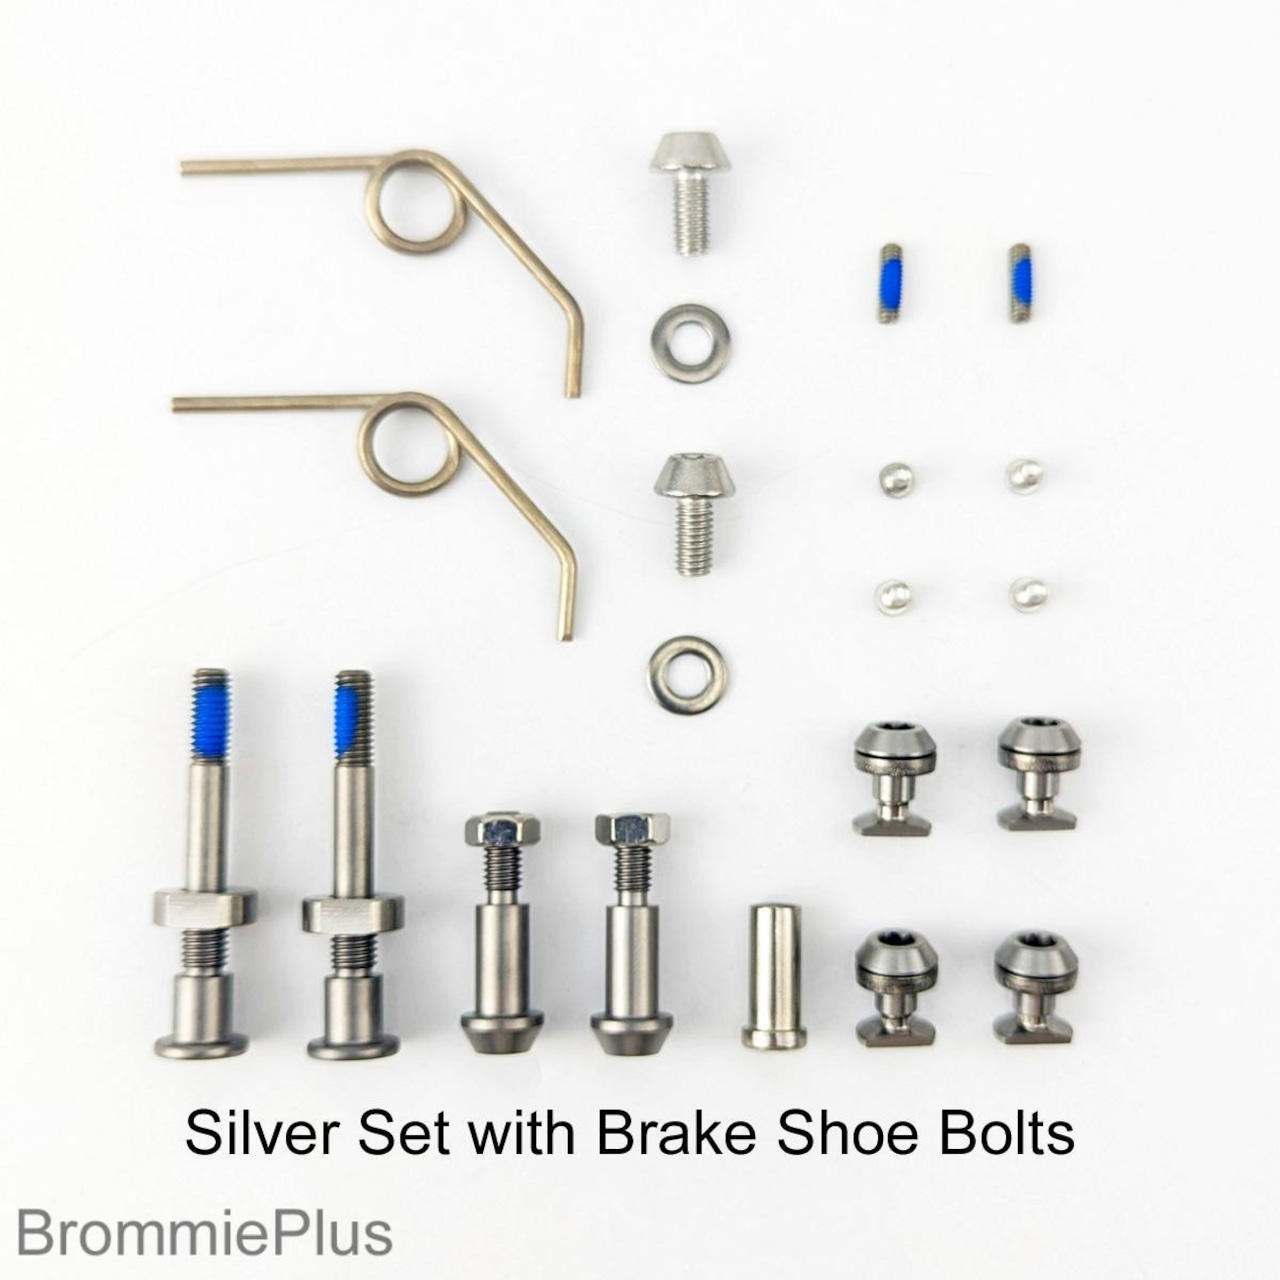 Brommieplus Stainless Steel Brake Caliper Bolts for Post-2018 Brompton [Silver]